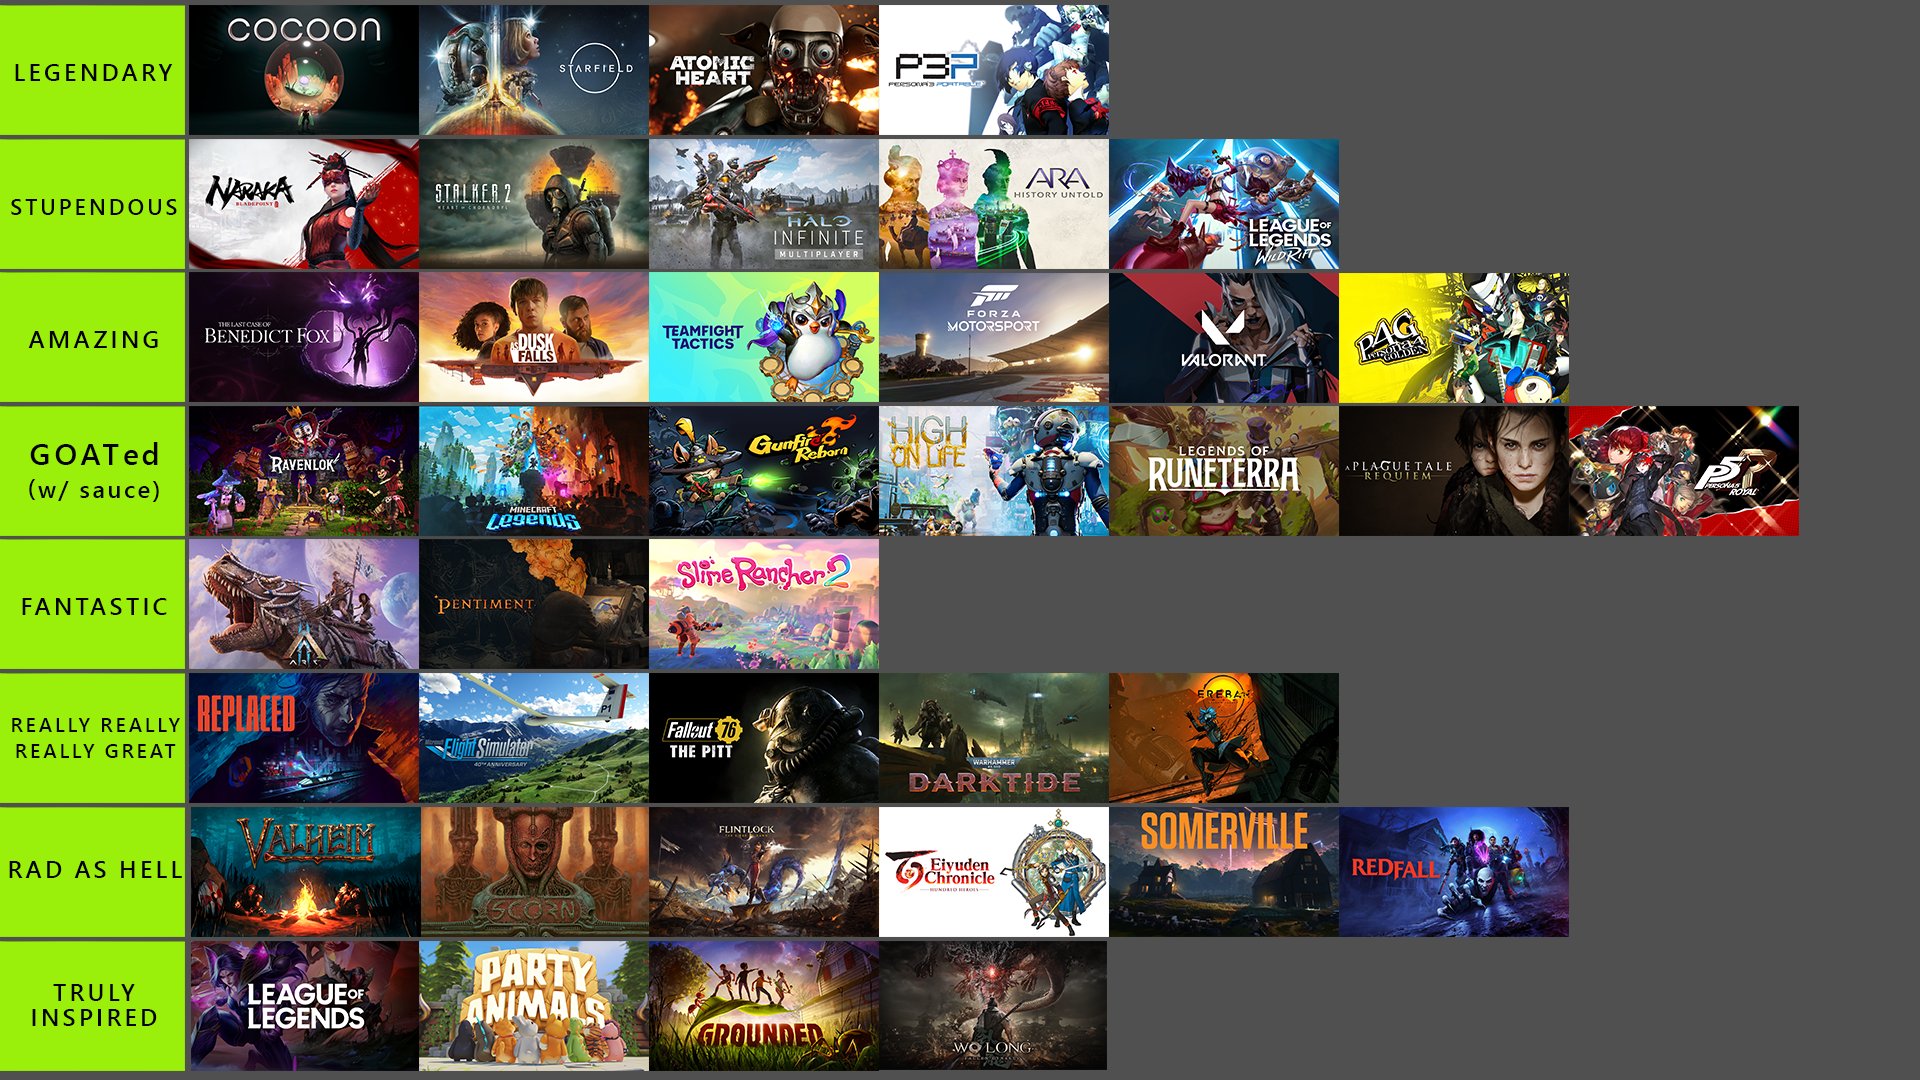 PC Game Pass on X: "Official tier list for everything announced at the Xbox &amp; Bethesda Games Showcase. hope there's hard feelings ✌ https://t.co/rPvl9xK945" / X